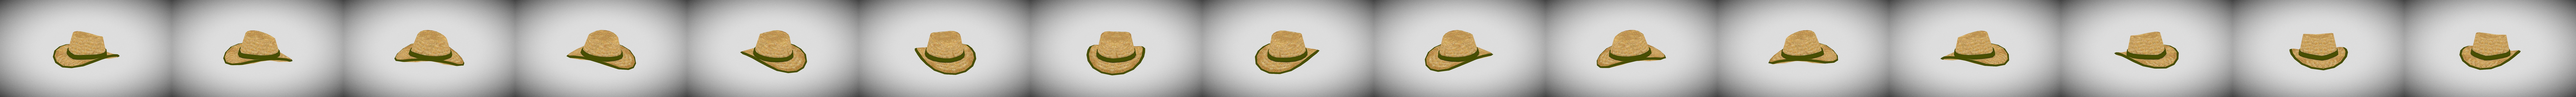 Straw Hat For Roblox Game Buy Royalty Free 3d Model By Catafest Catafest 14ccdf3 Sketchfab Store - new hat meshes roblox